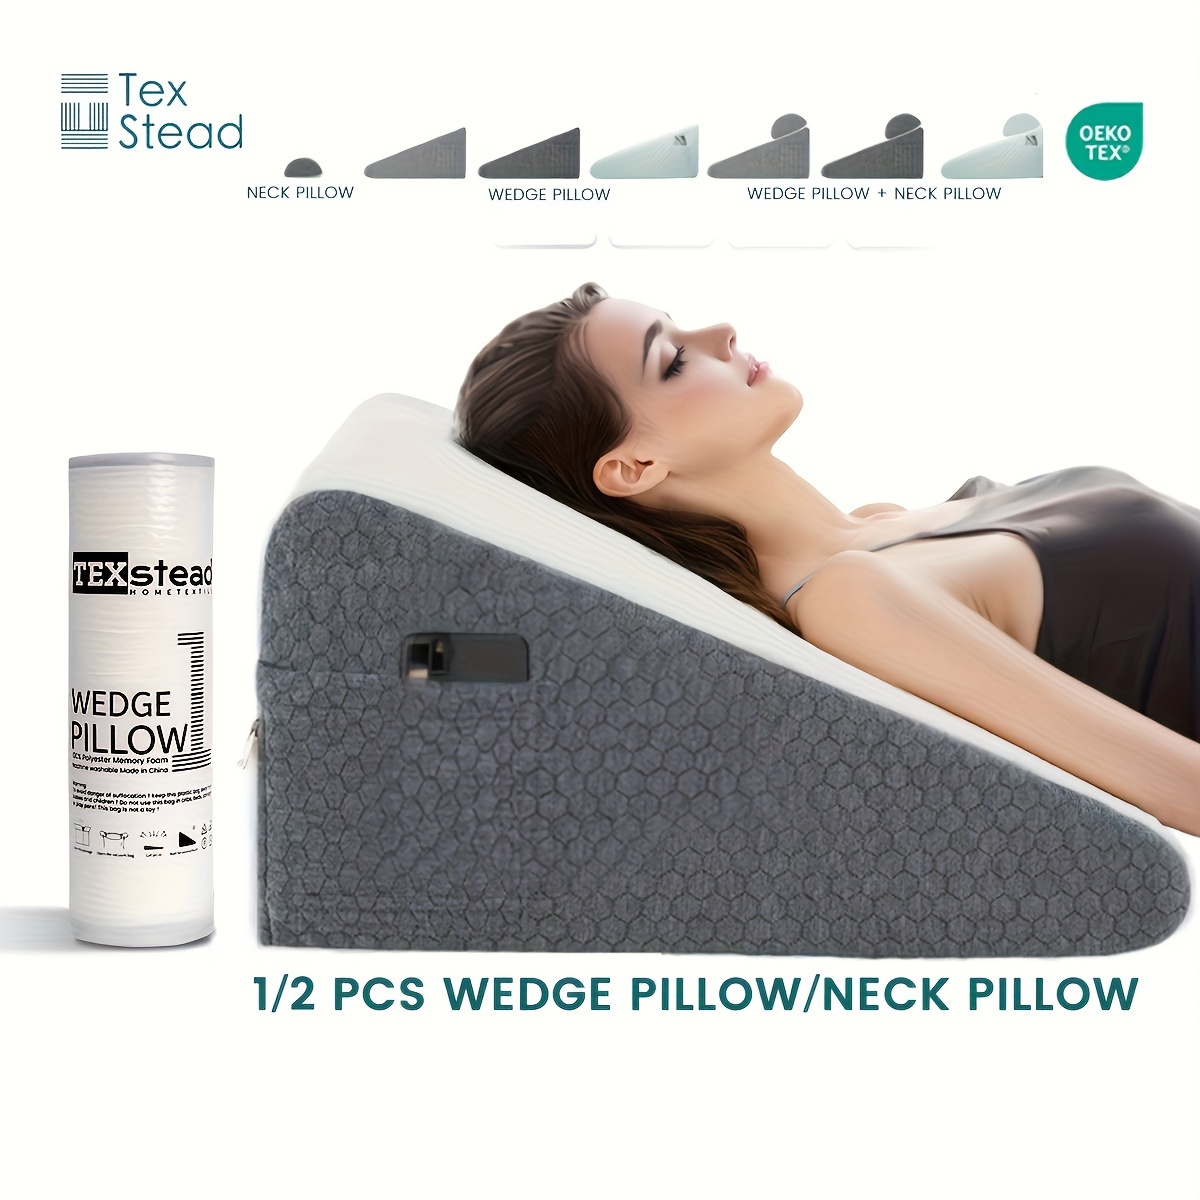 

1/2 Pcs Memory Foam Bed Wedge Pillow/neck Pillow For Back, Leg, And Knee - Triangle Pillow With Removable Cover